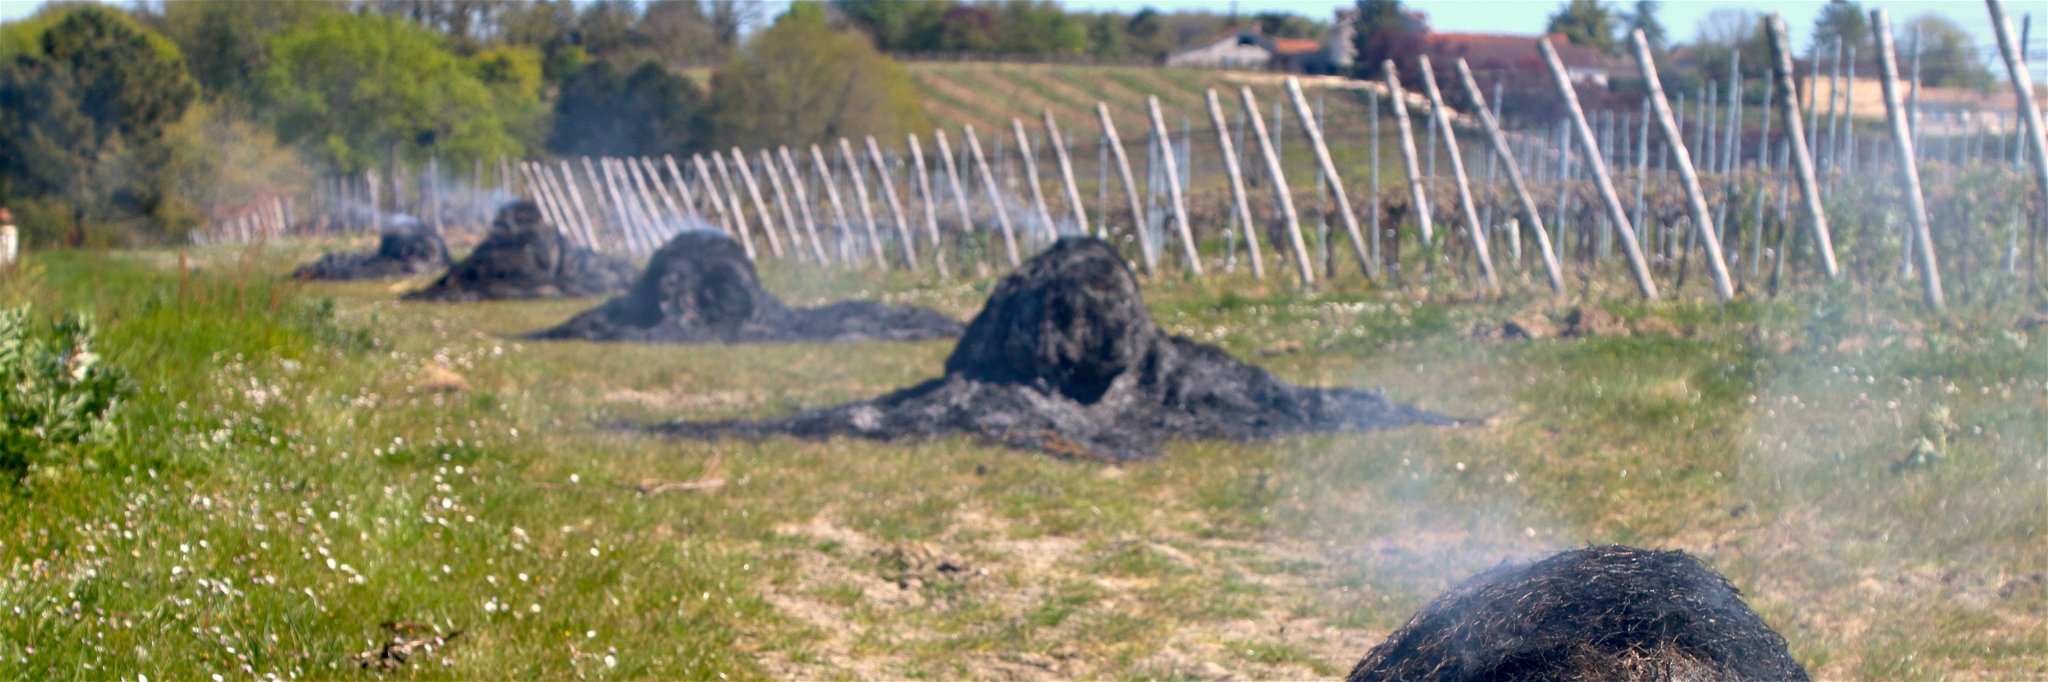 Burning hay in an effort to save vines from frost and cold in the&nbsp;Dorodogne, France.